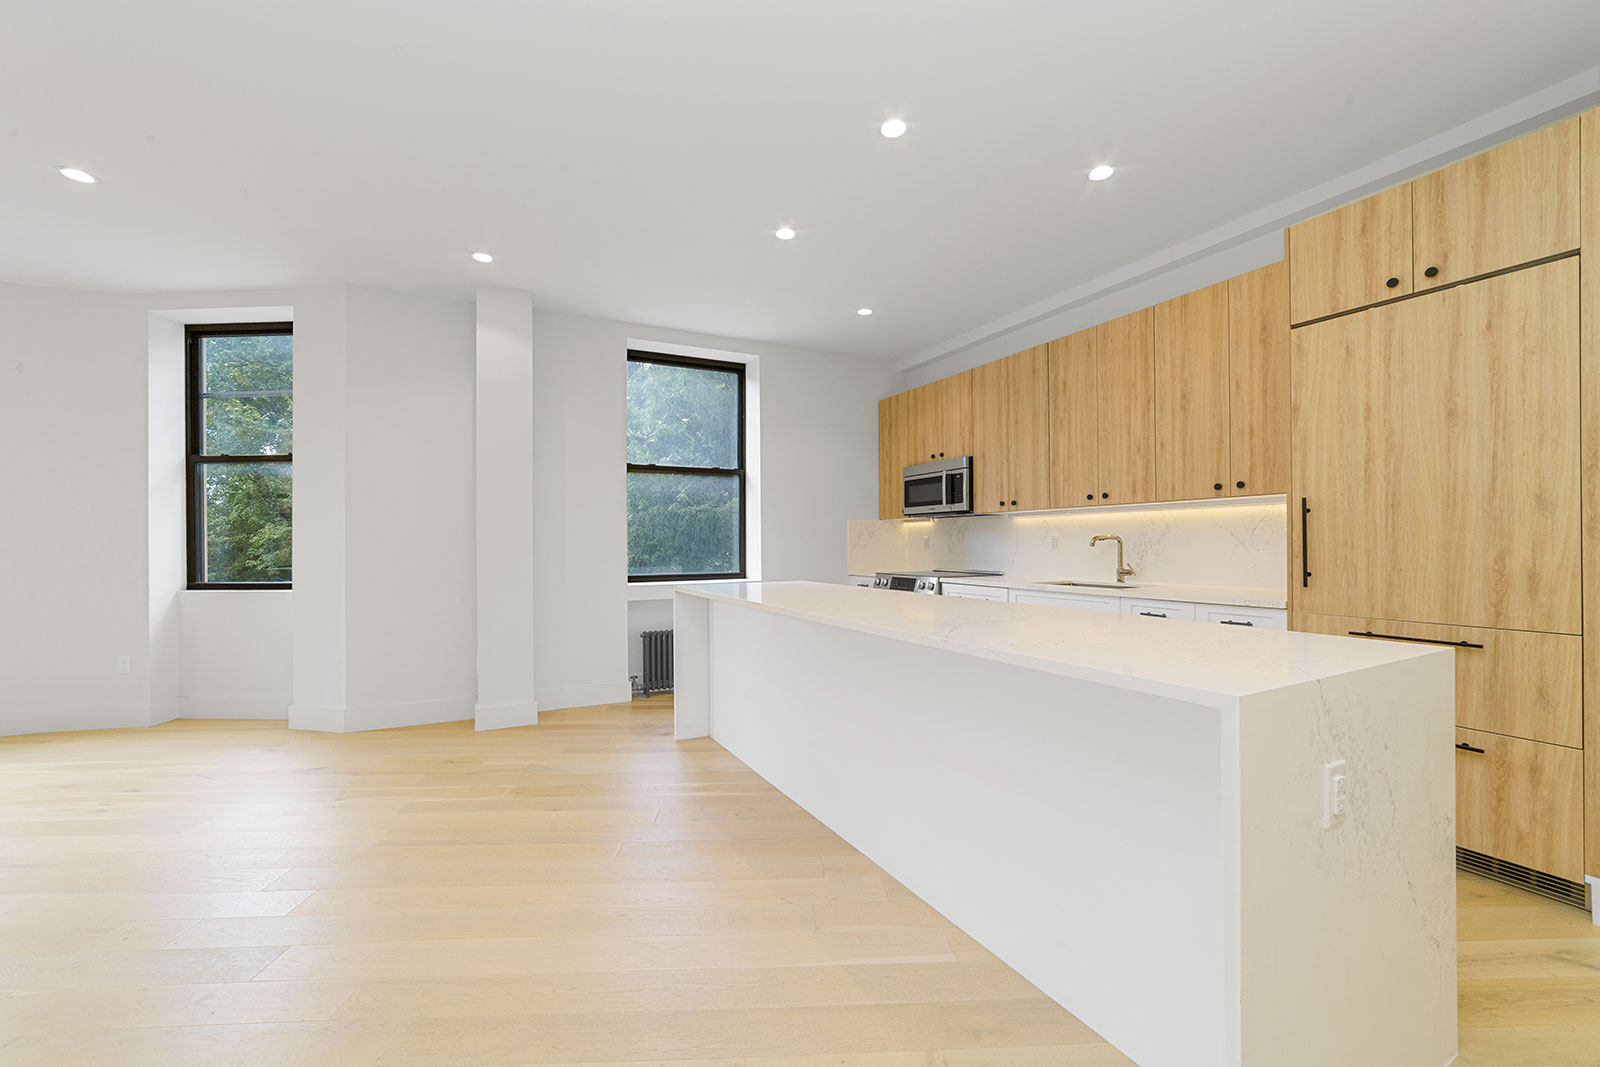 Studio, One, Two, & Three-Bedroom Apartments in Upper West Side Manhattan, NY - 125 Riverside - Living Room and Kitchen with Light Wood-Style Flooring, 2 Windows with Black Trim, White Walls, a Marble Kitchen Island, Light Wood-Style Cabinets, Stainless Steel Appliances, and Marble Backsplash